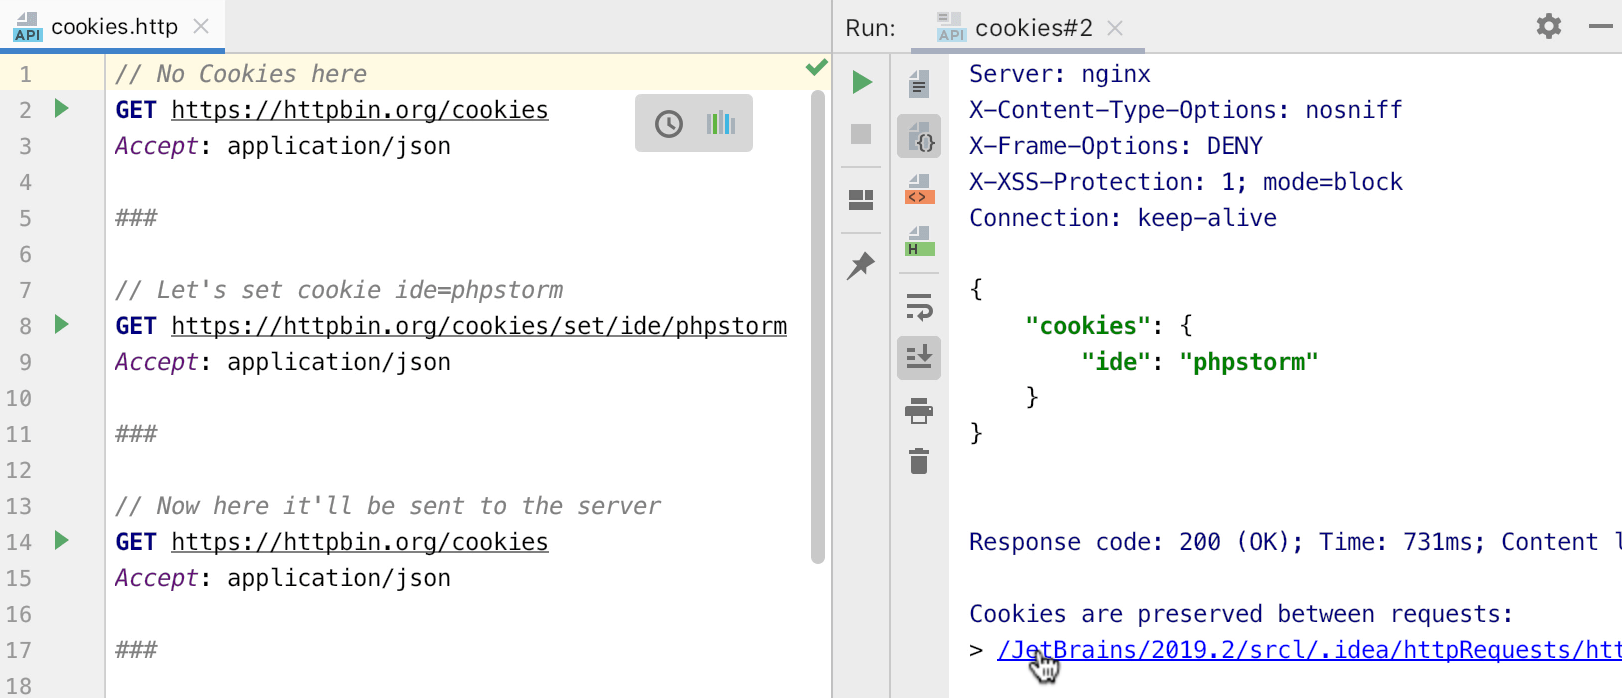 Preserving cookies in the HTTP client